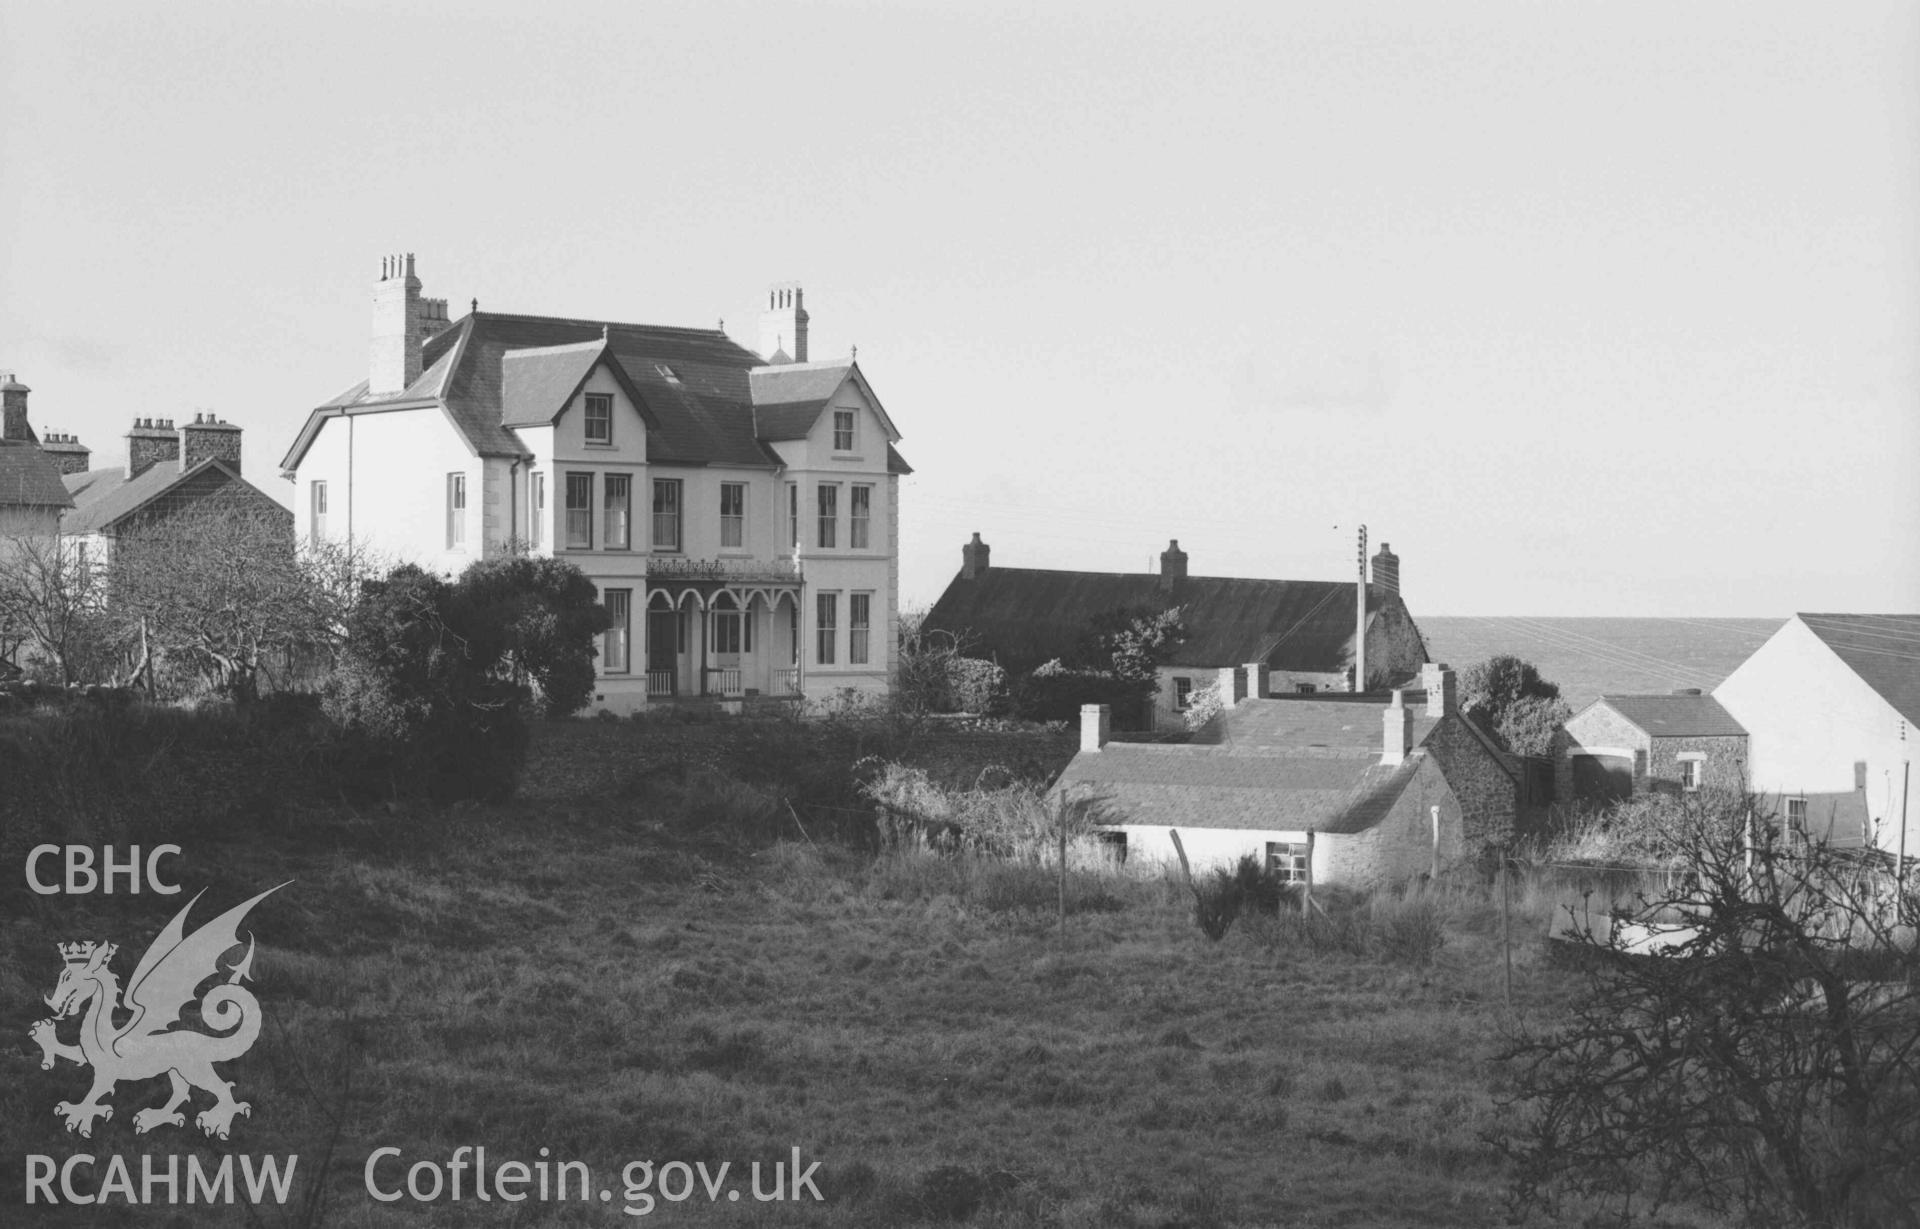 Digital copy of a black and white negative showing houses in Aberarth. Photographed by Arthur Chater on 28 December 1968. Looking north north west from Grid Reference SN 4788 6377.